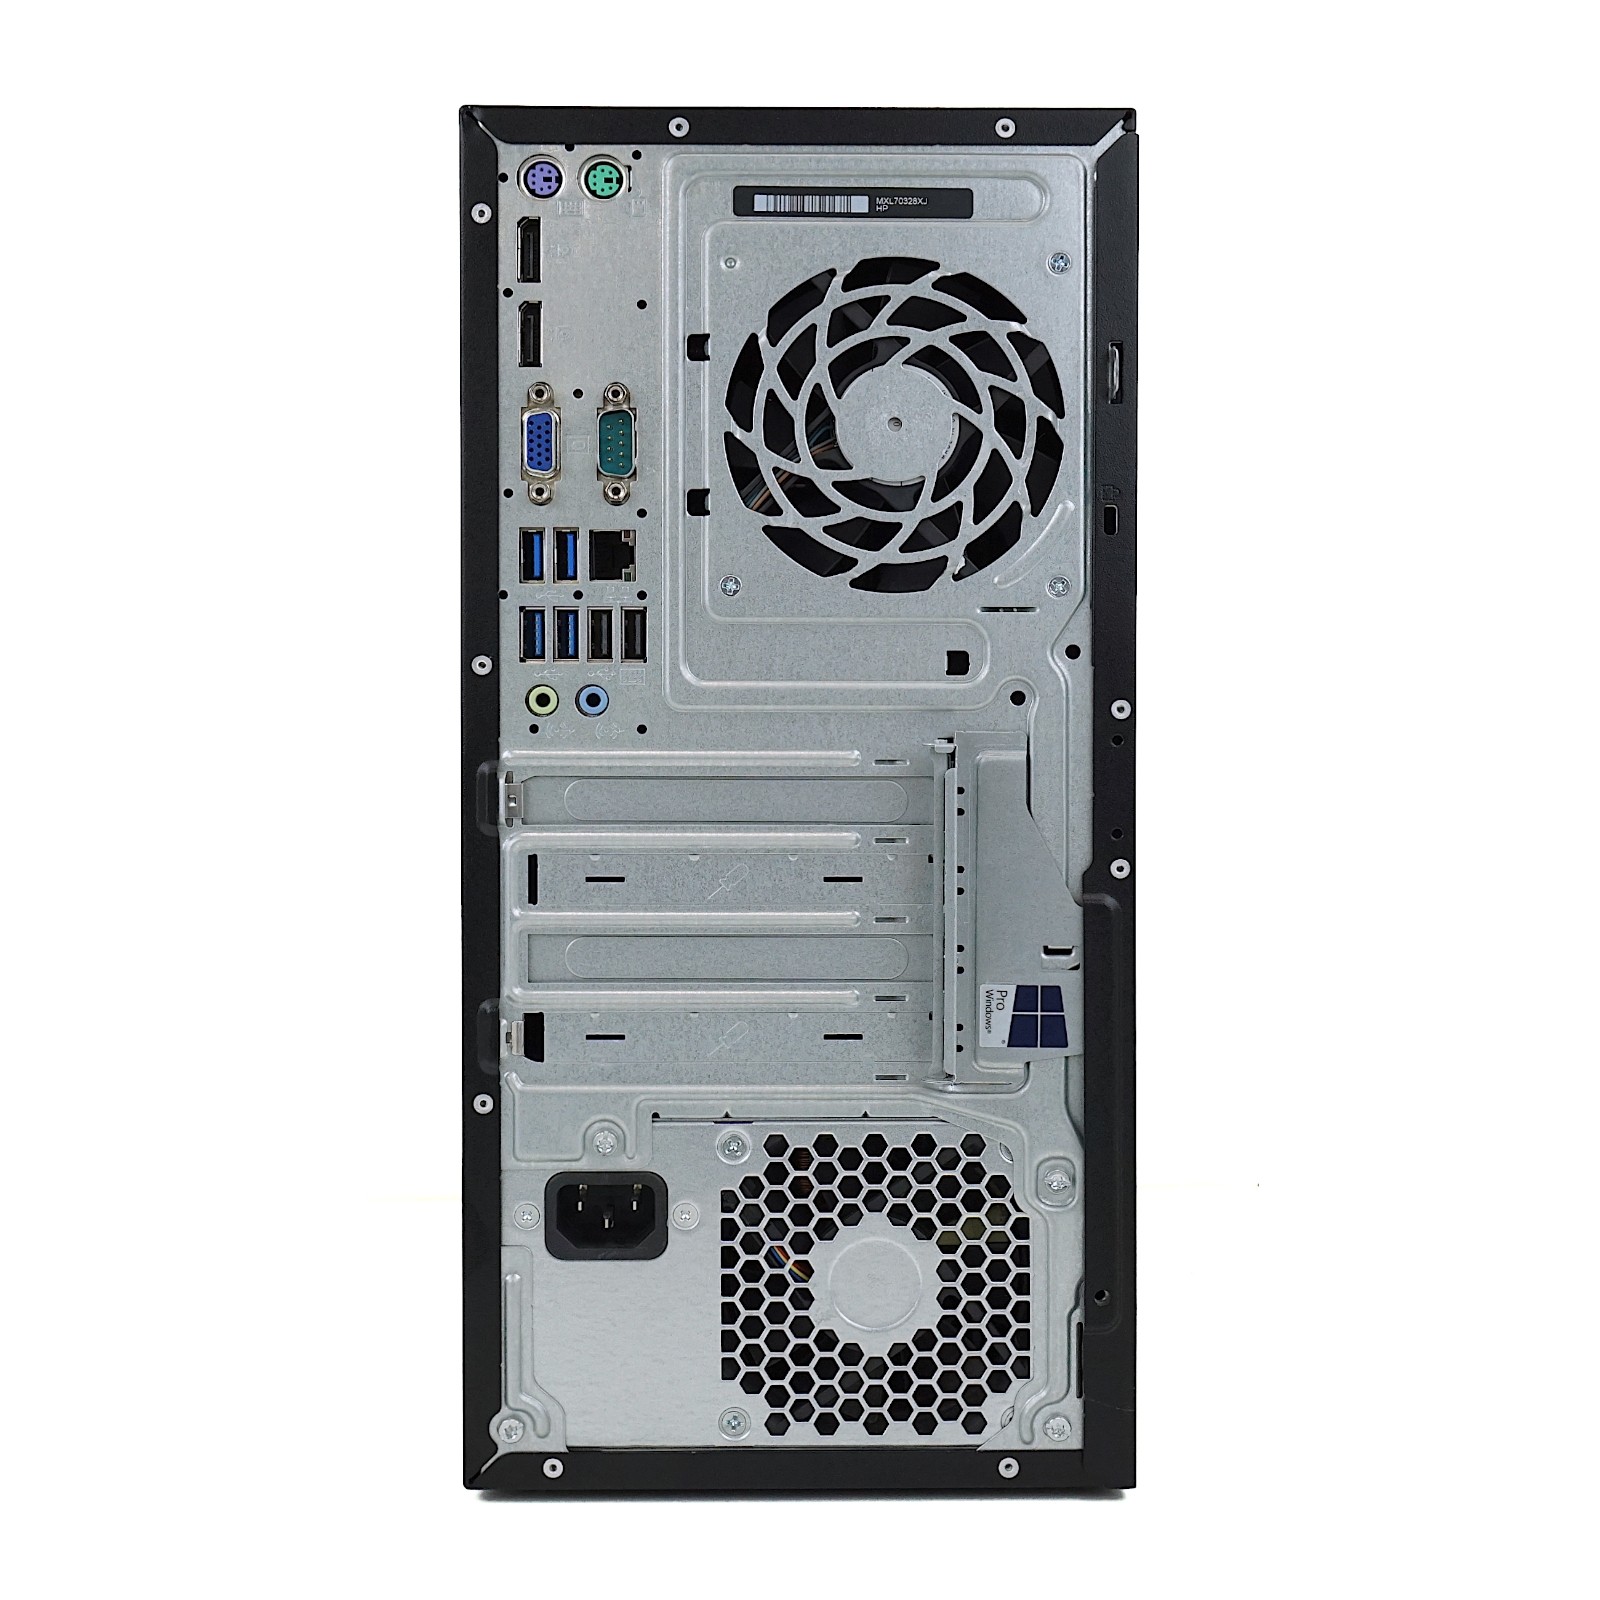 HP ProDesk 600 G2 Microtower – Specs and upgrade options